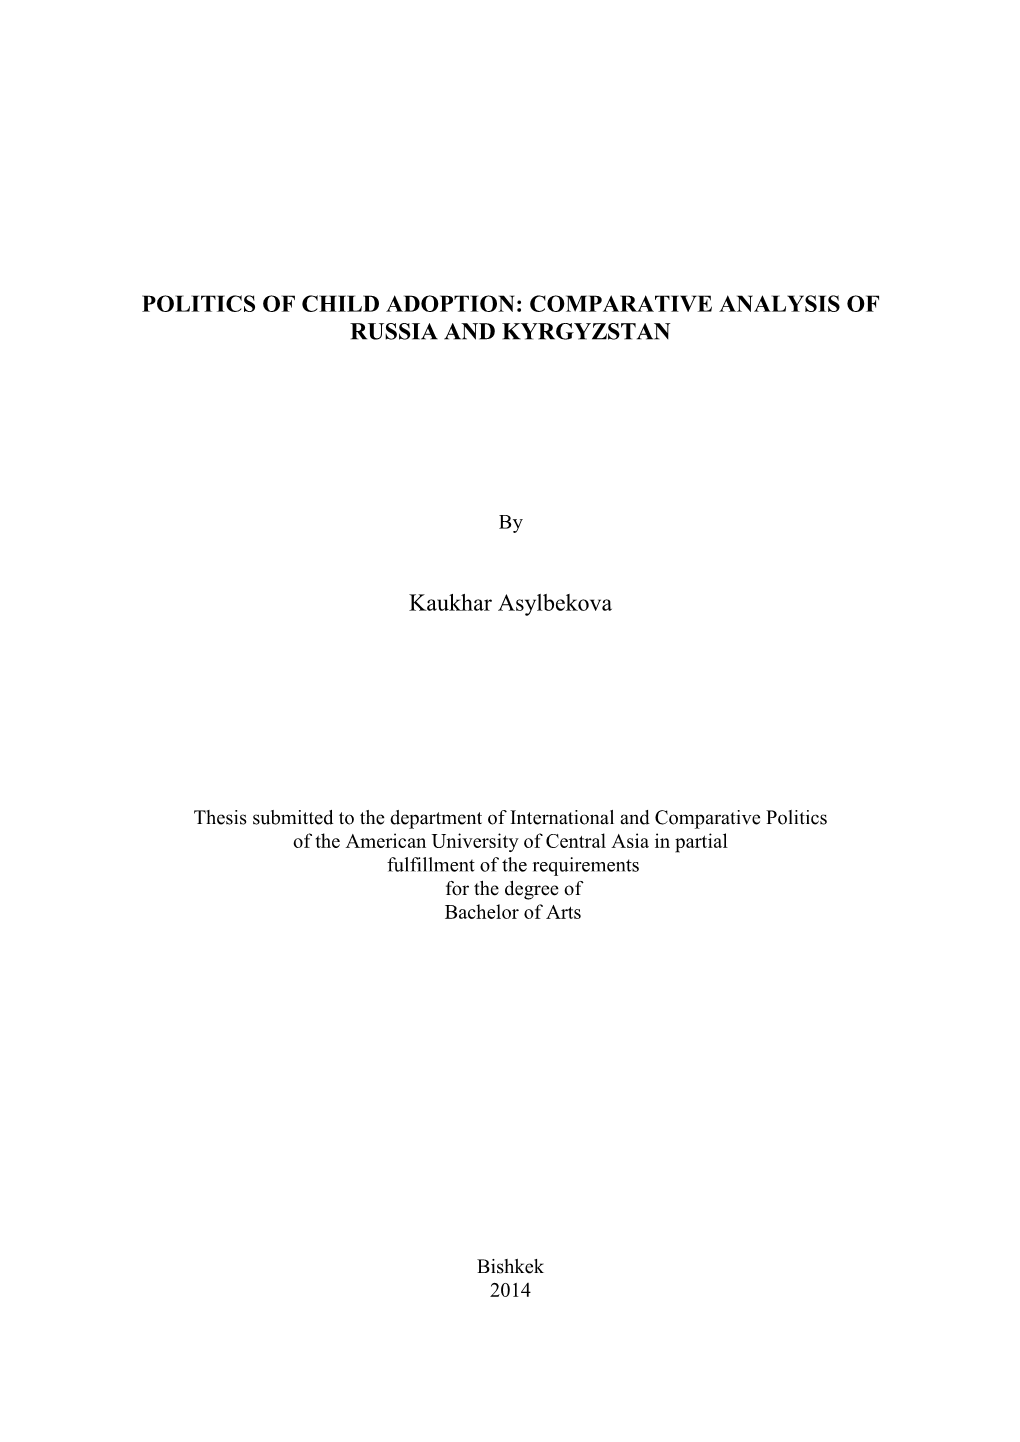 Politics of Child Adoption: Comparative Analysis of Russia and Kyrgyzstan